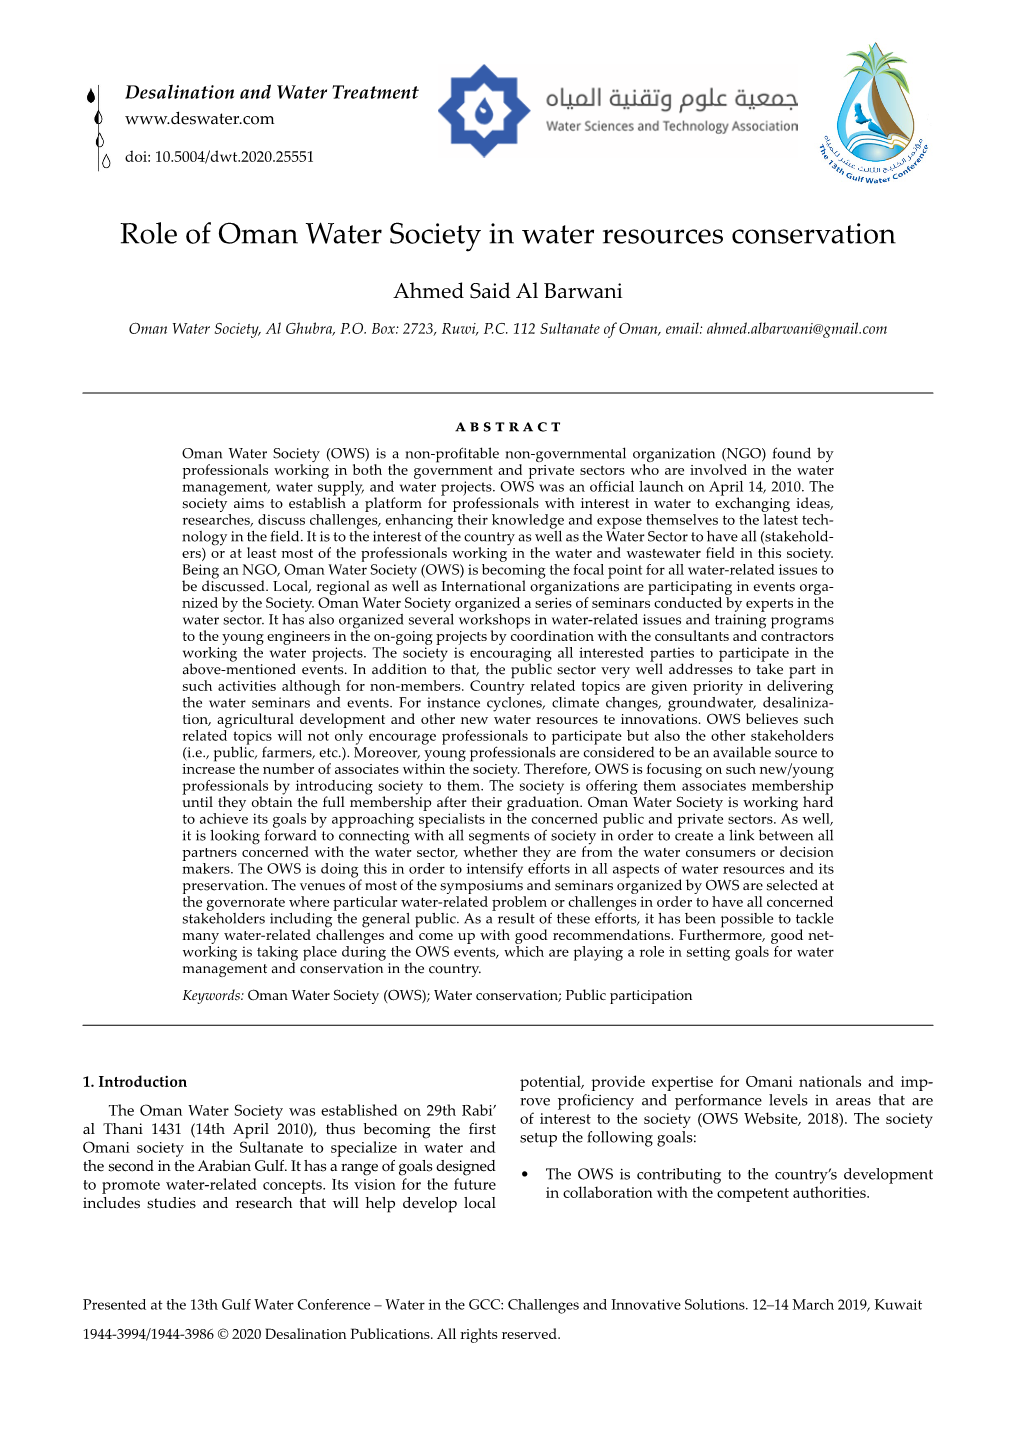 Role of Oman Water Society in Water Resources Conservation